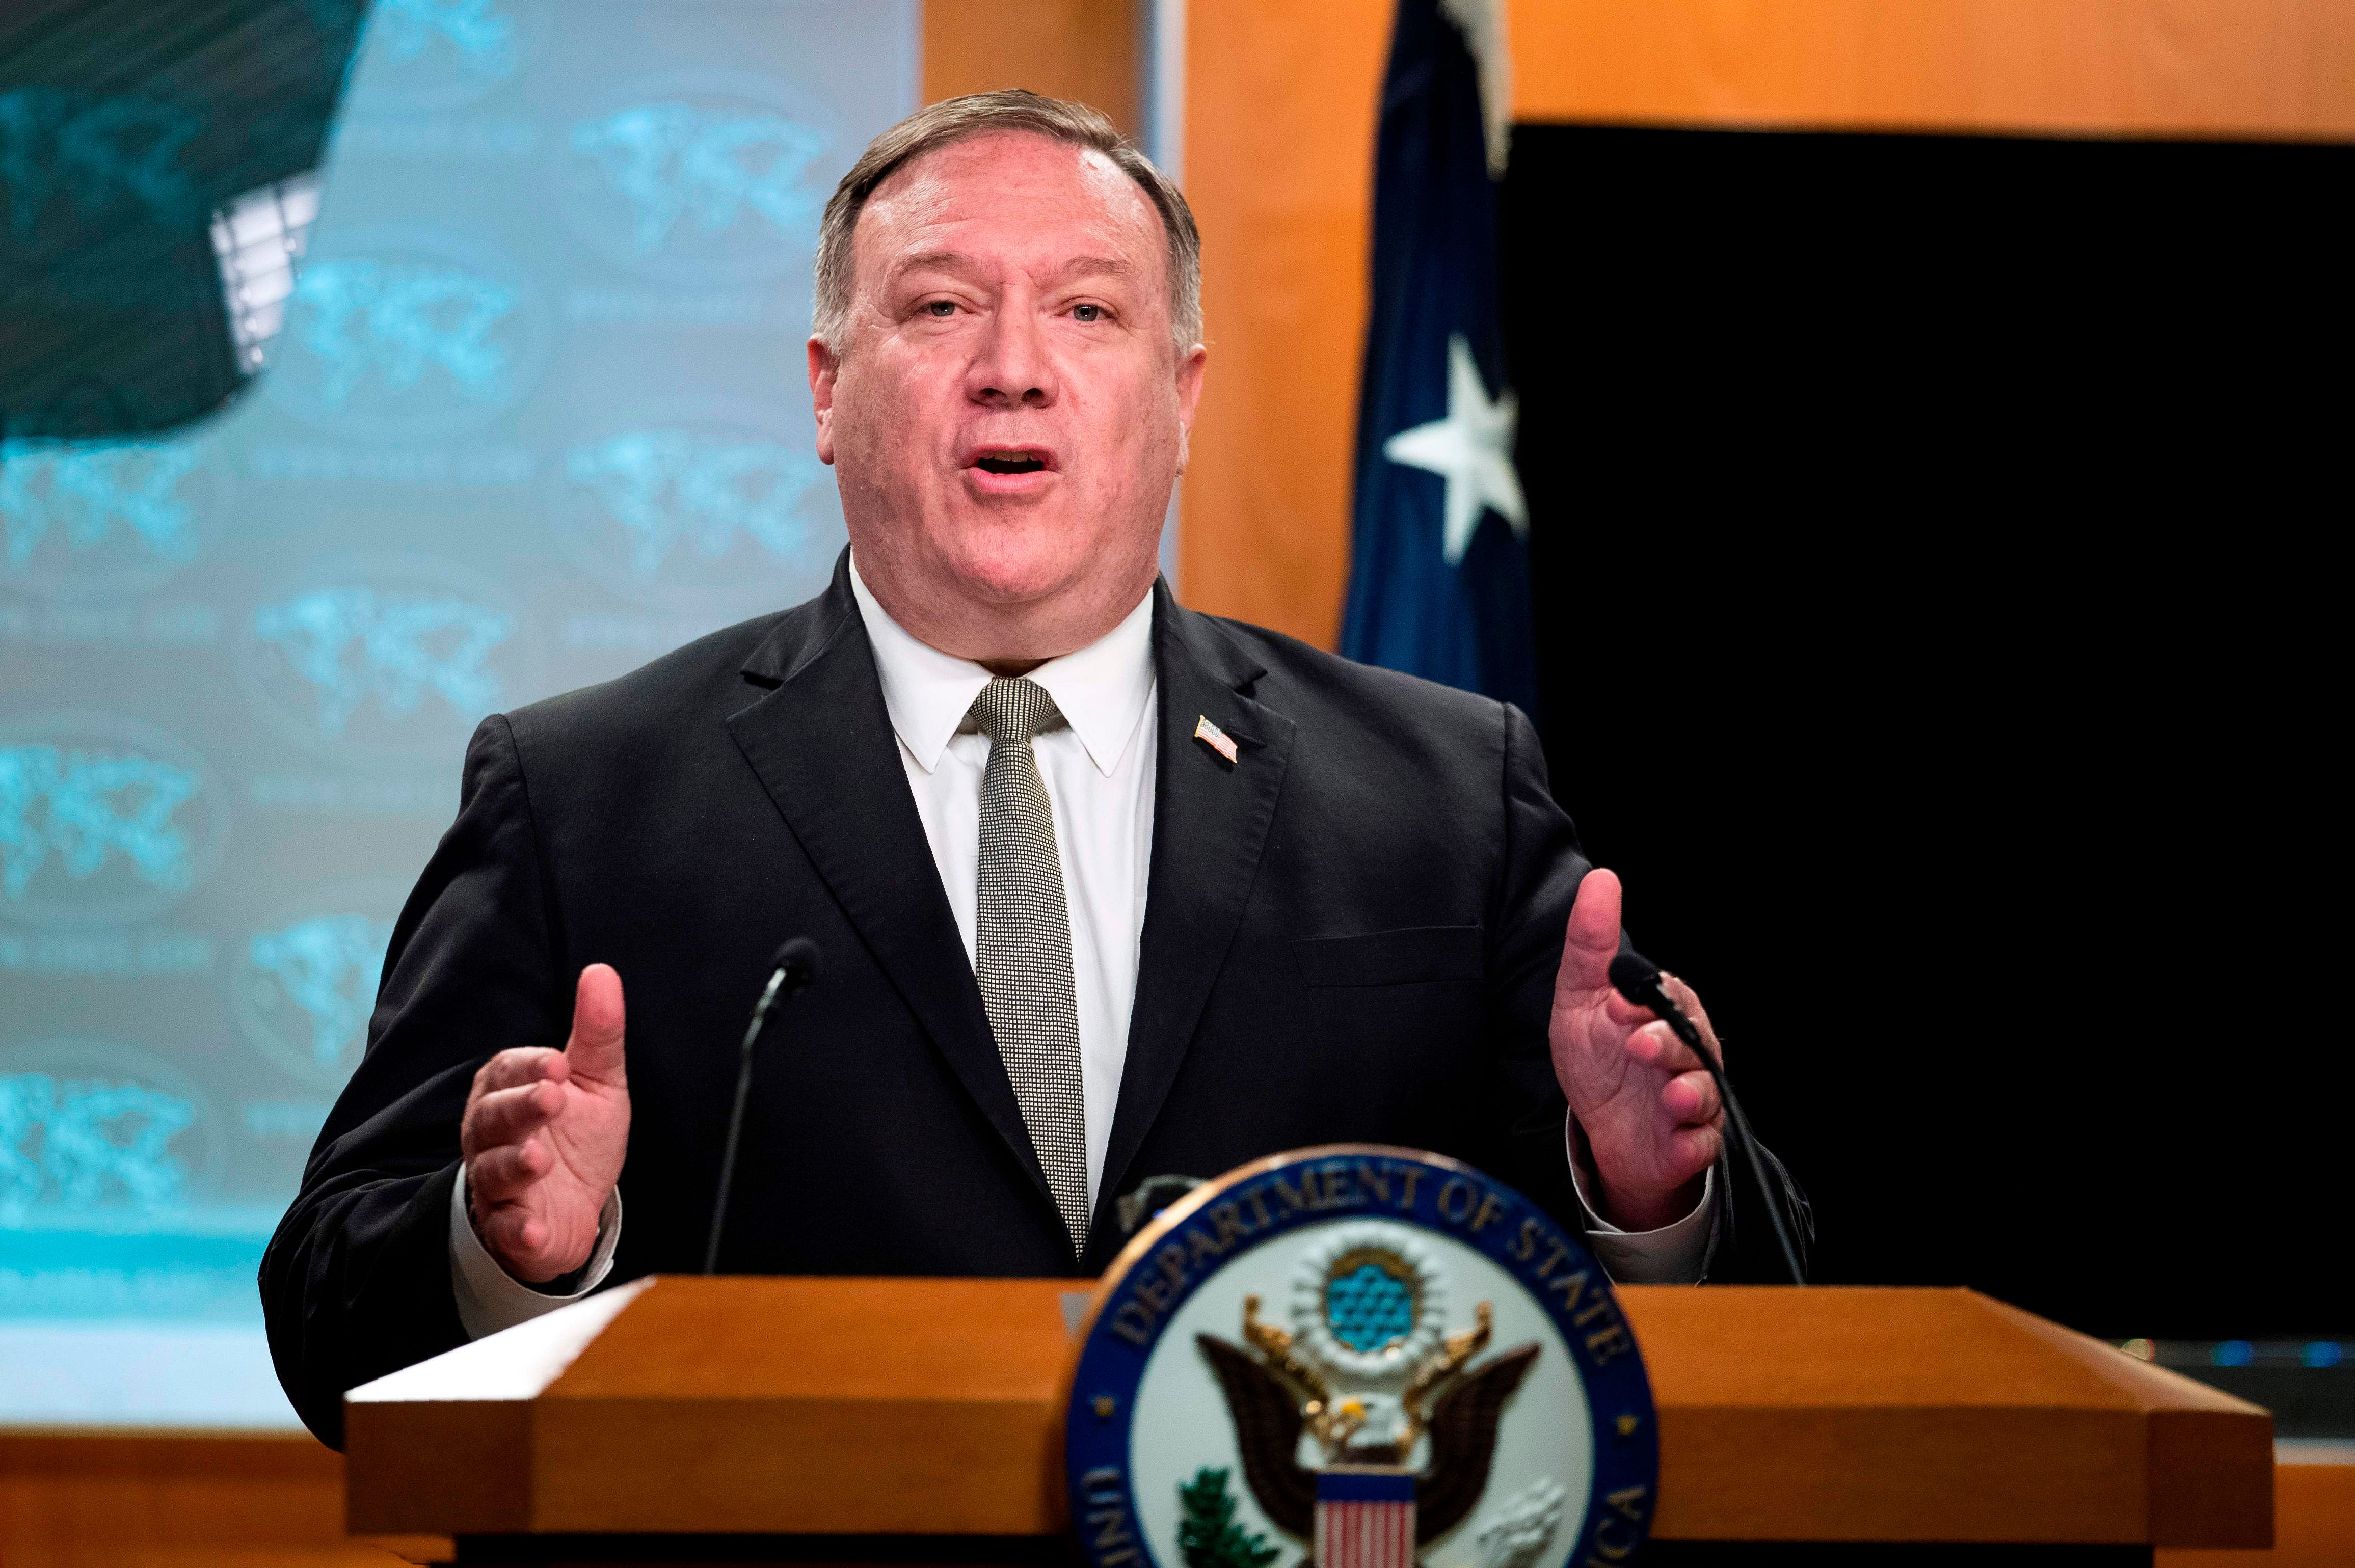 The letter from US Congress members to Secretary of State Mike Pompeo comes after European lawmakers passed a resolution this month calling for the European Union to downgrade its attendance at the summit, also over human rights. Credit: AFP File Photo